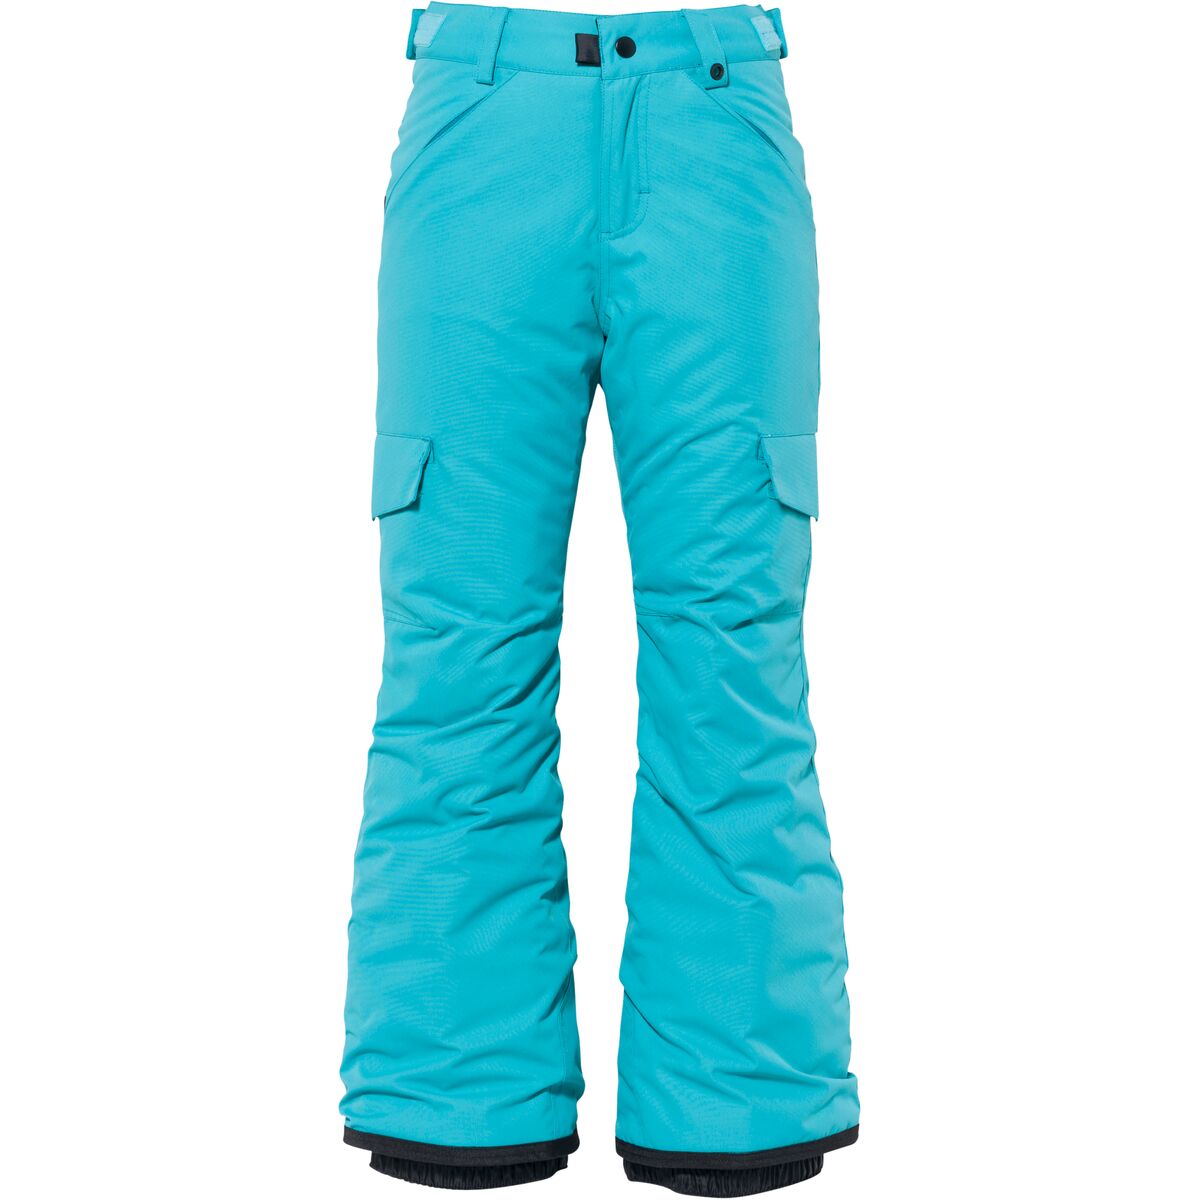 Details about   686 GIRLS LOLA INSULATED SNOW PANT 2019 